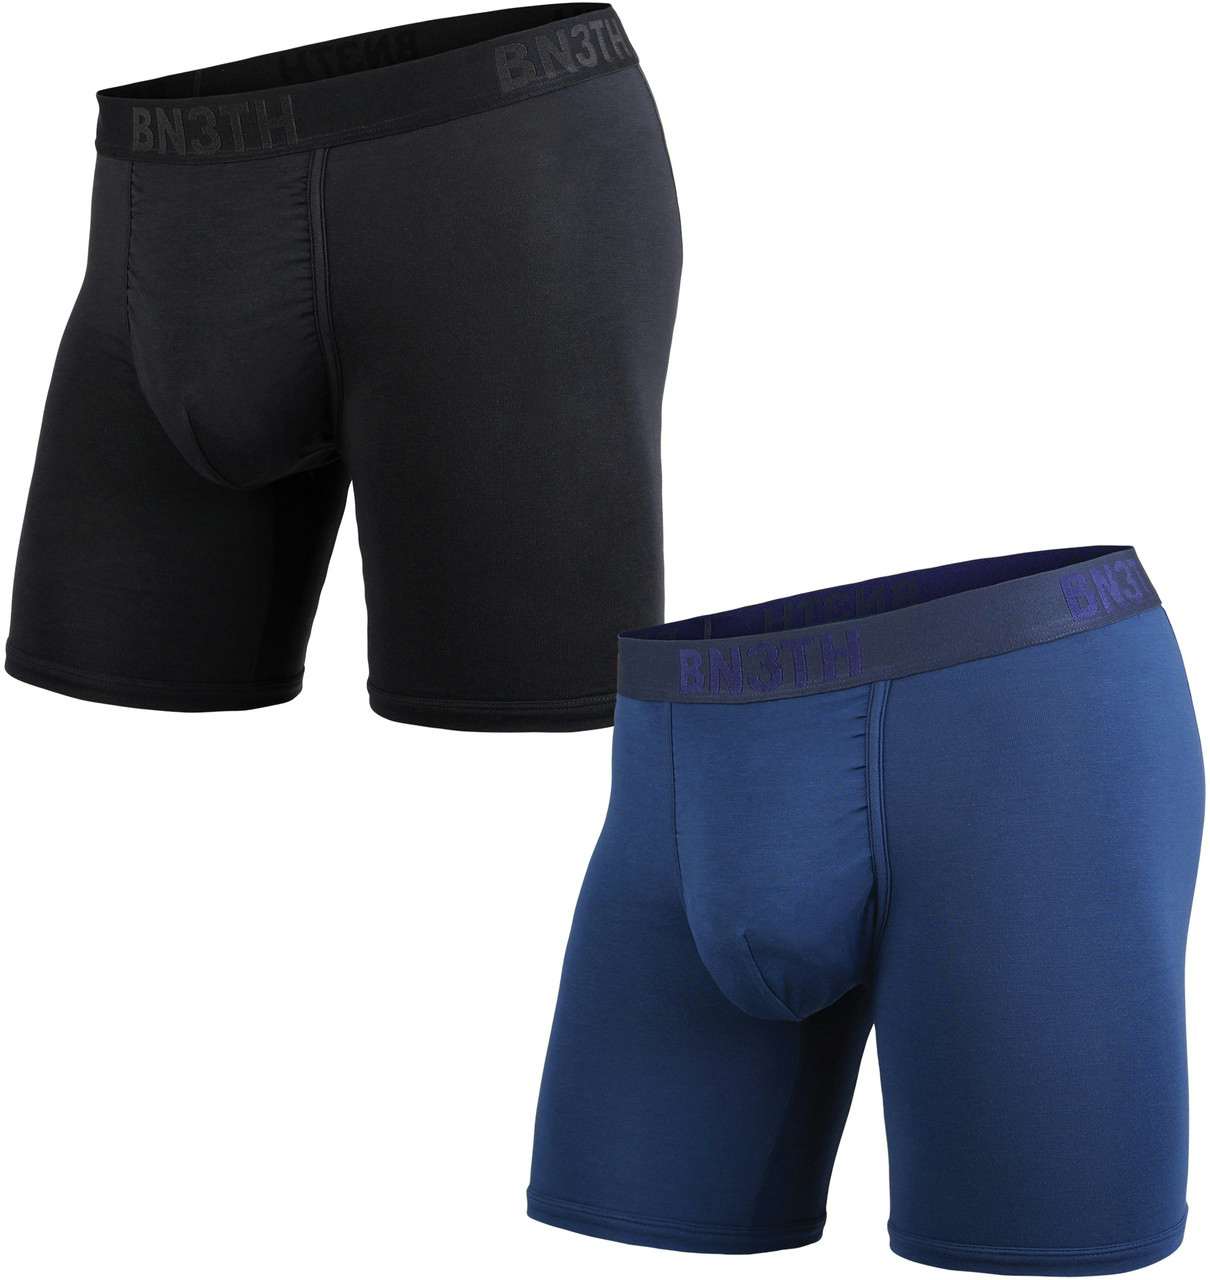 Classic Boxer Briefs (2 Pack) Black/Navy